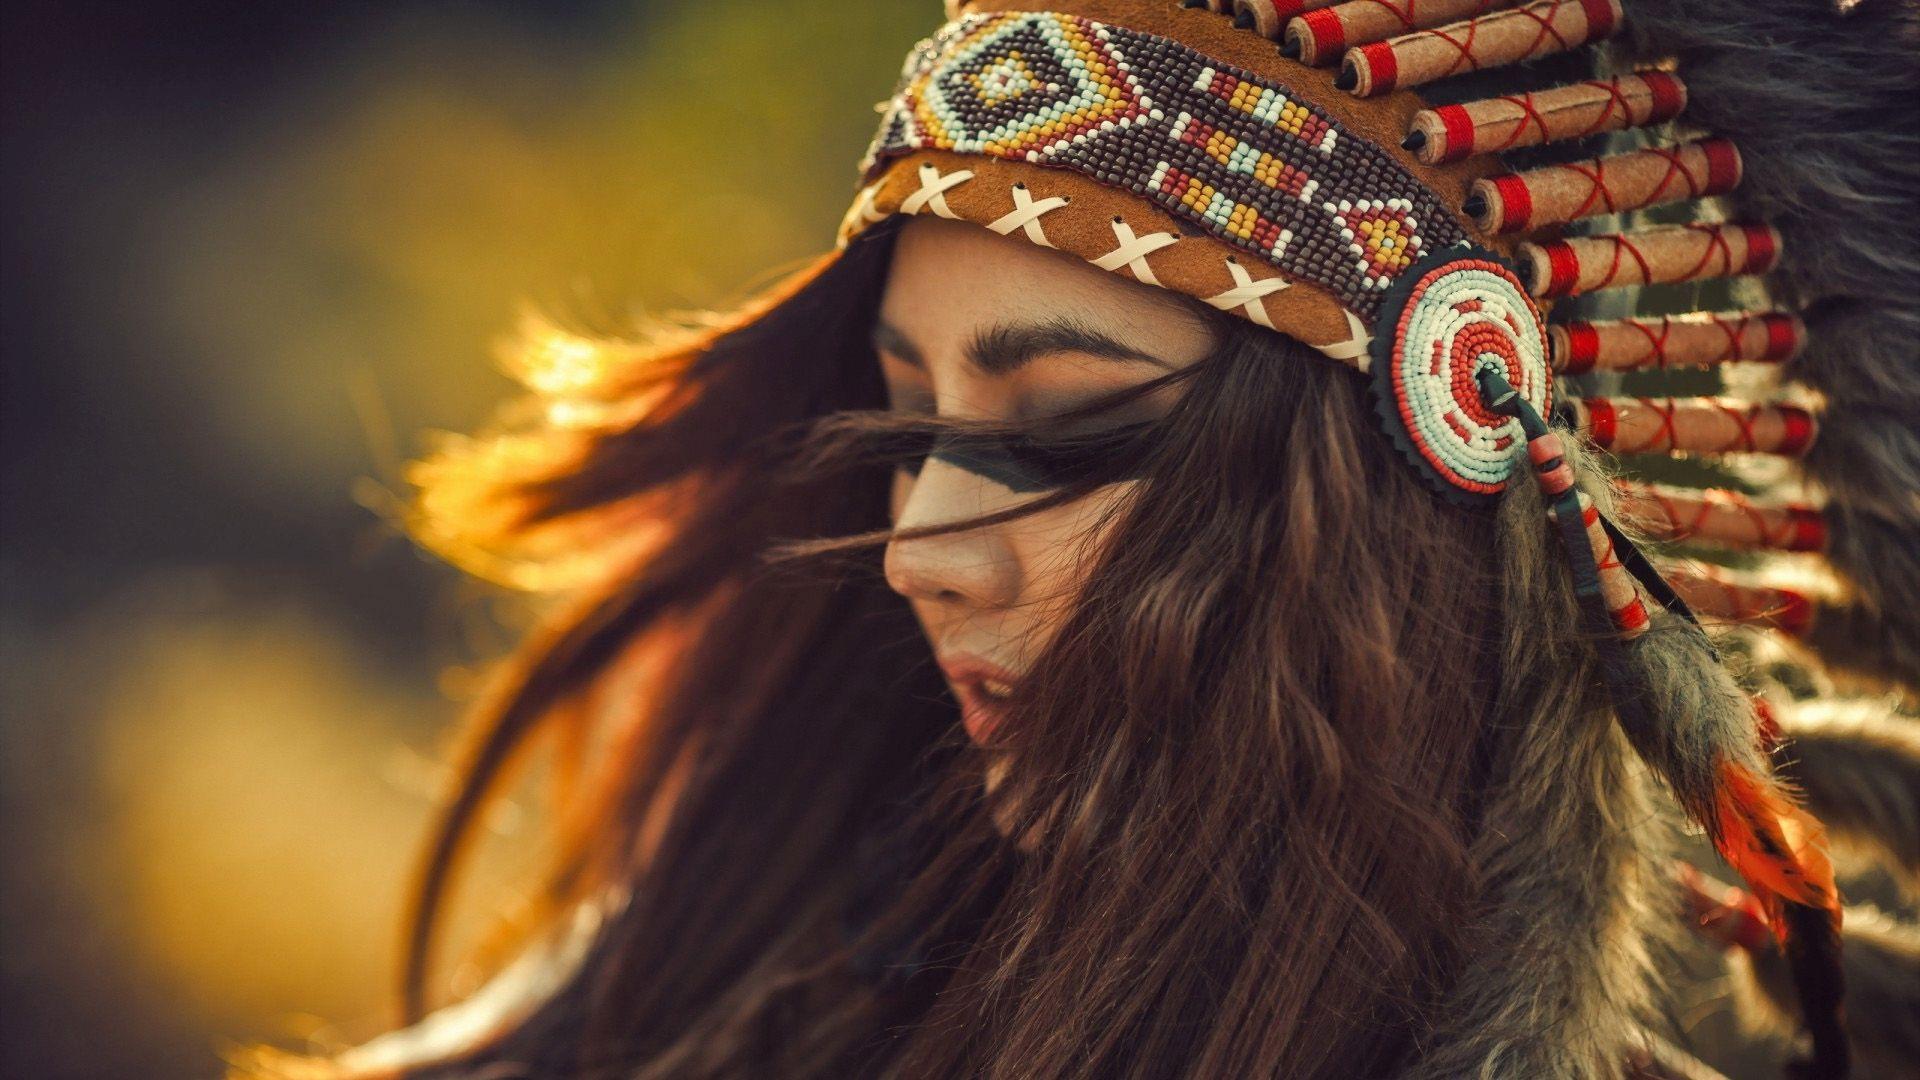 Native american woman free desktop background and wallpaper